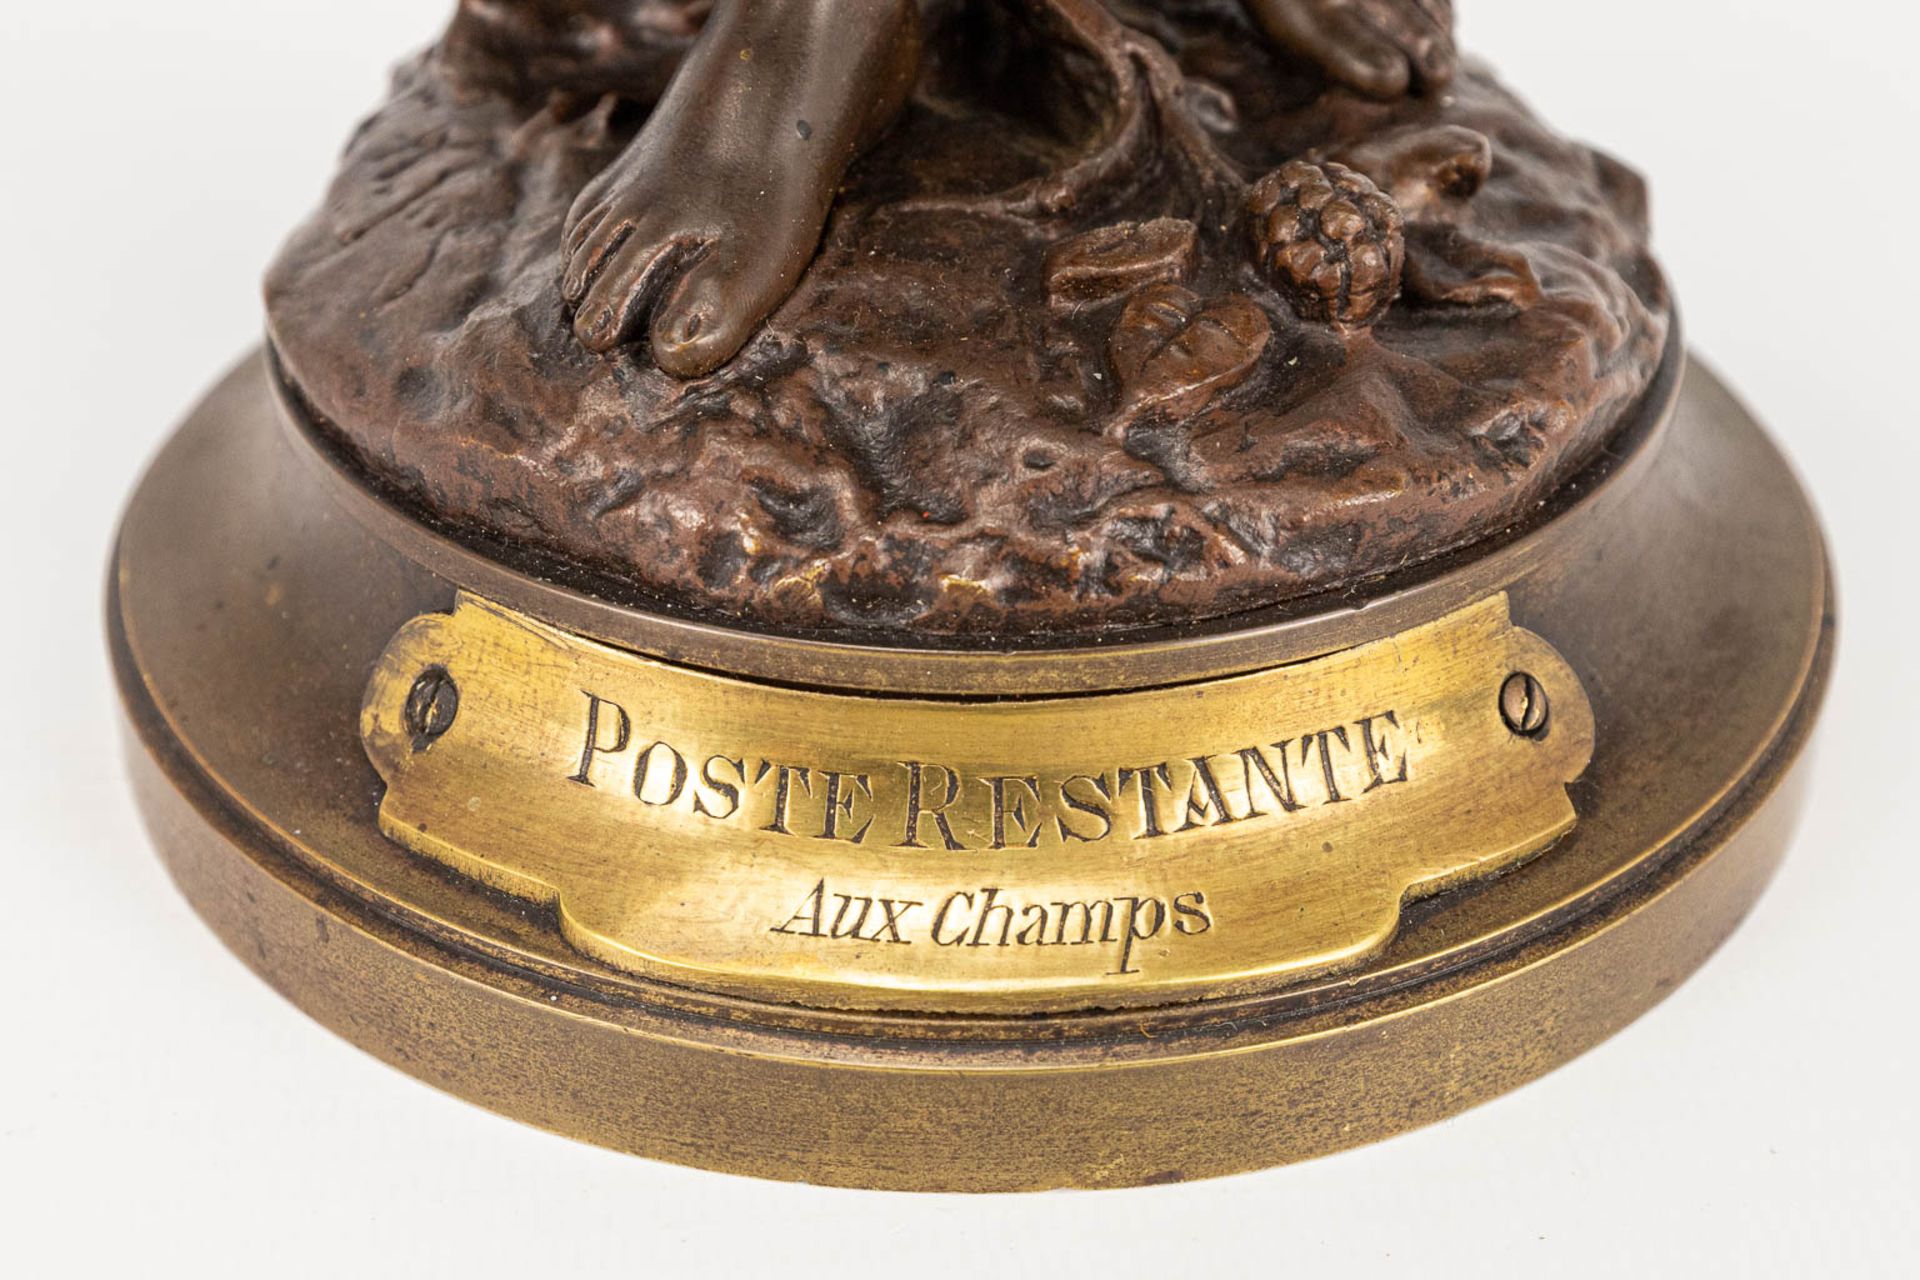 Charles ANFRIE (1833-1905) 'Poste Restante aux champs' a bronze statue of a young lady. - Image 11 of 12